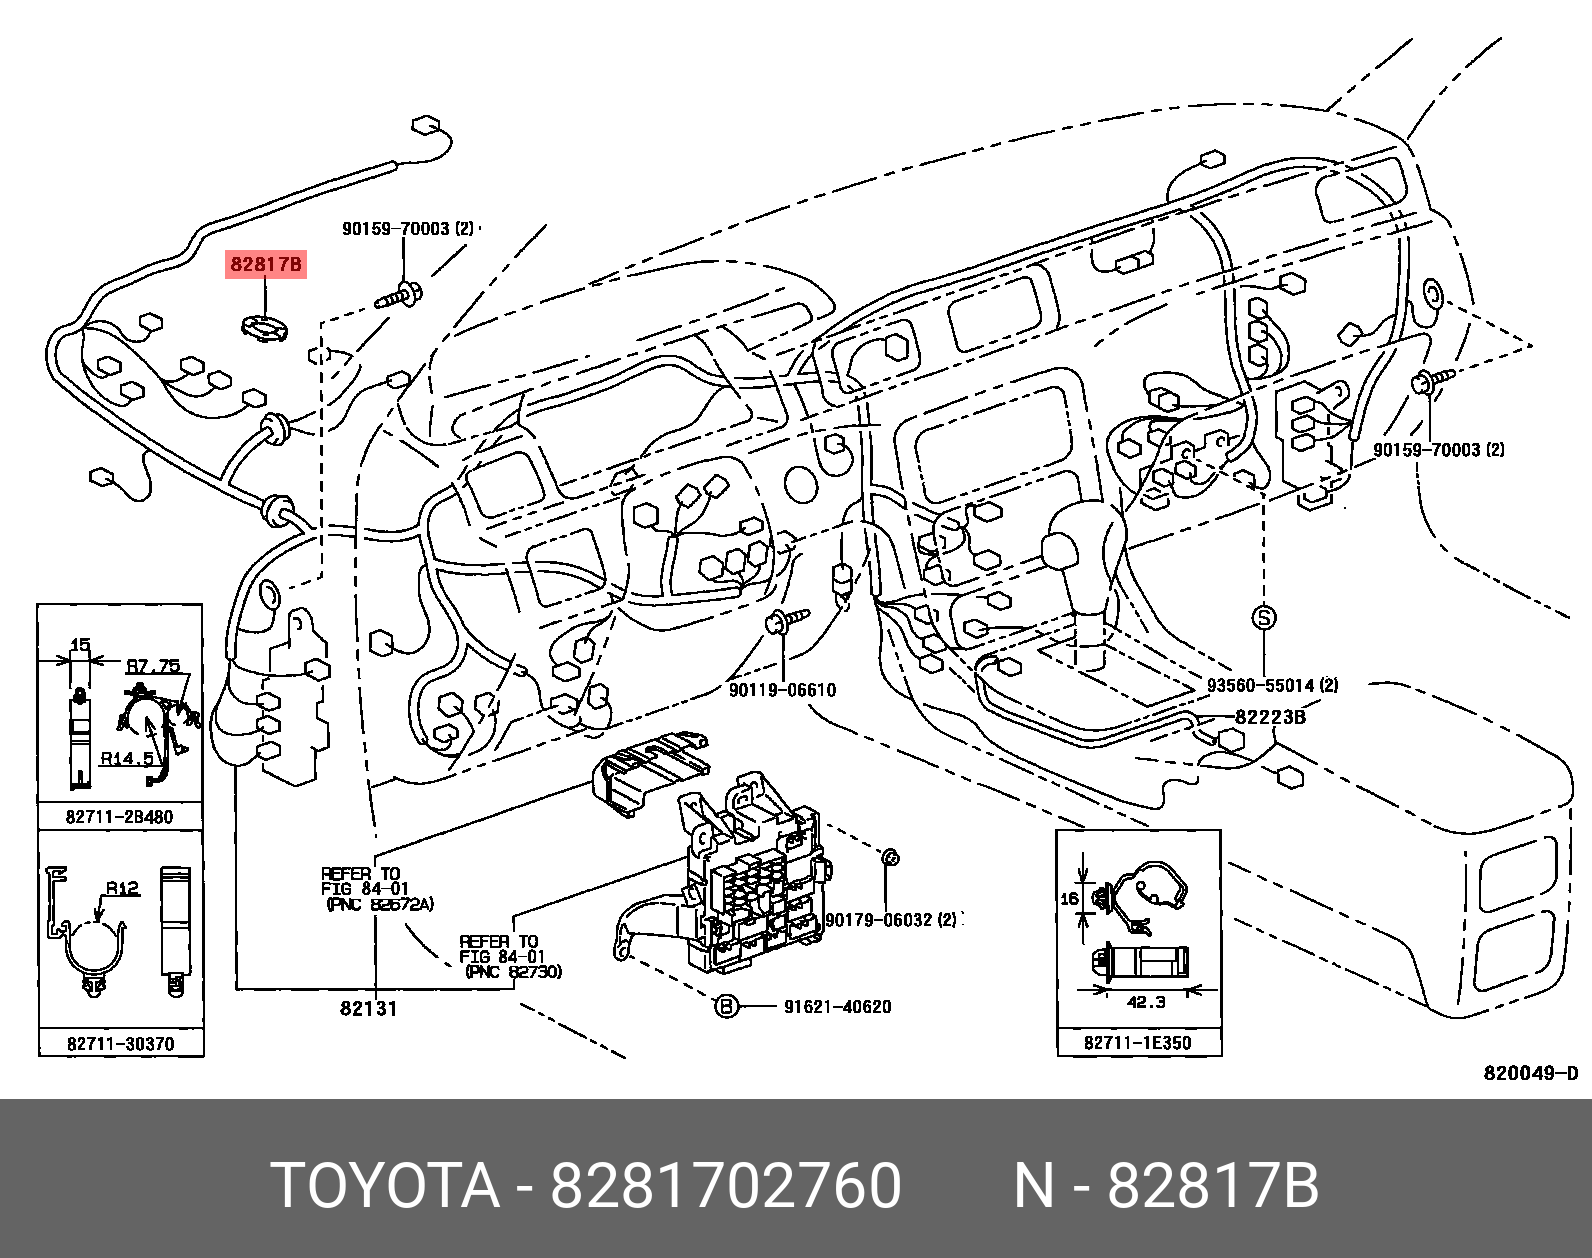 AURIS 200610 - 201208, PROTECTOR, WIRING HARNESS, NO.6